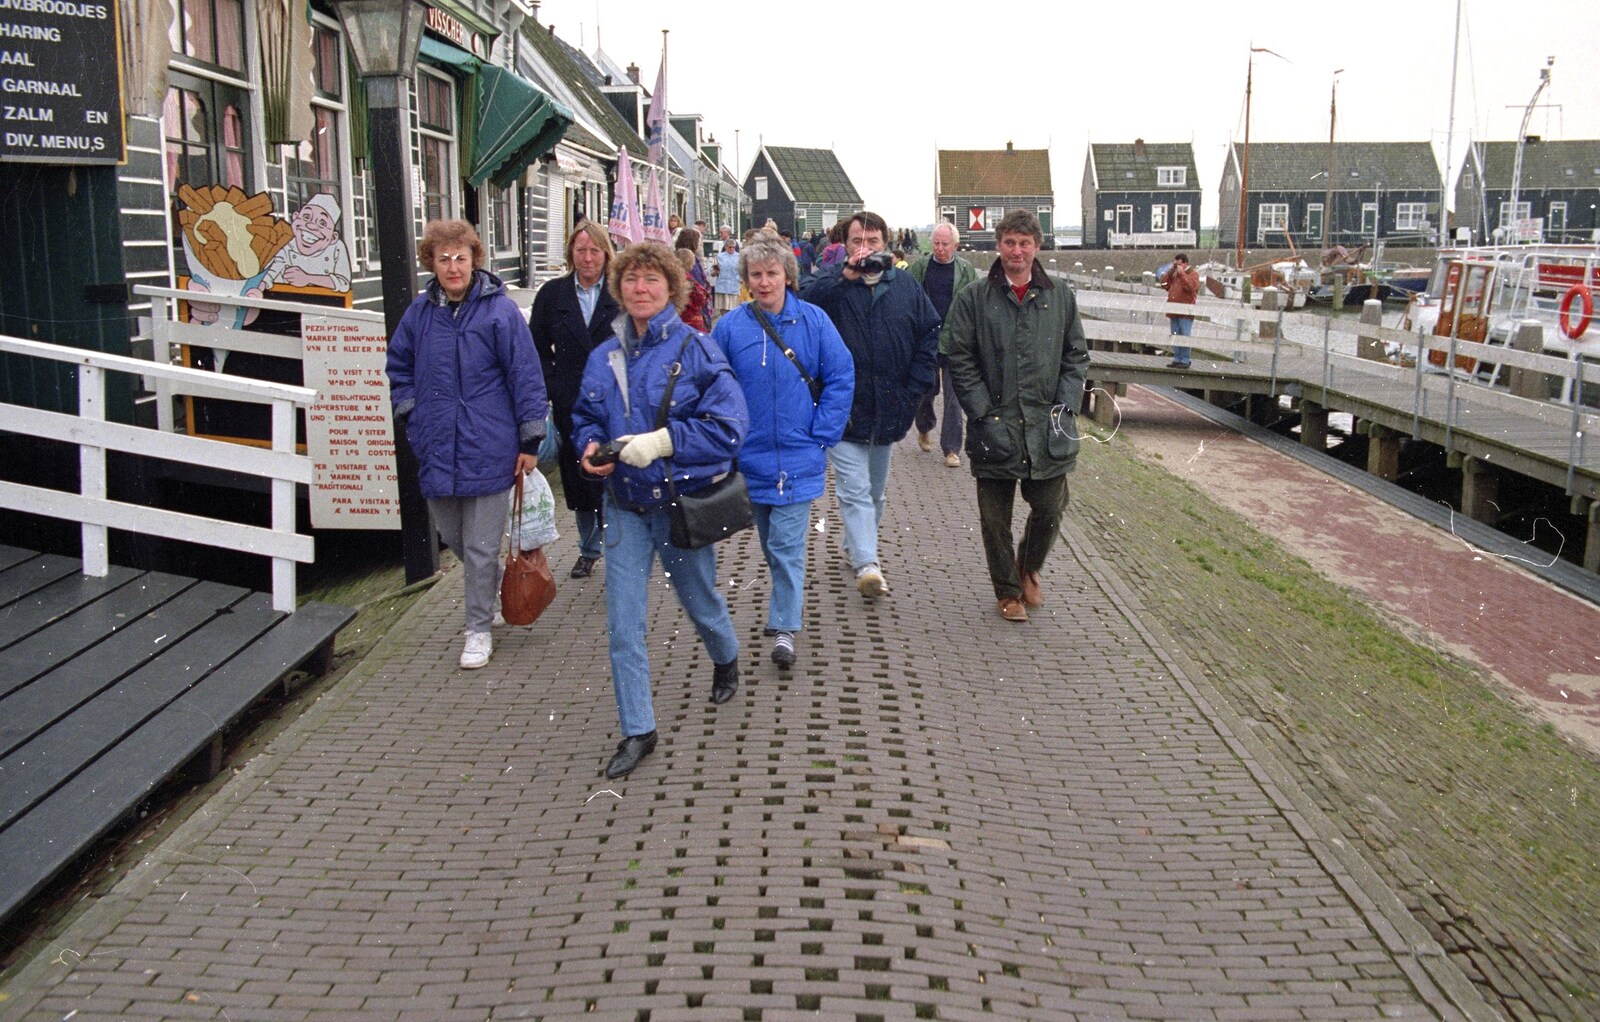 Out and About in Amsterdam, Hoorne, Vollendam and Edam, The Netherlands - 26th March 1992: Seaside huts in Vollendam